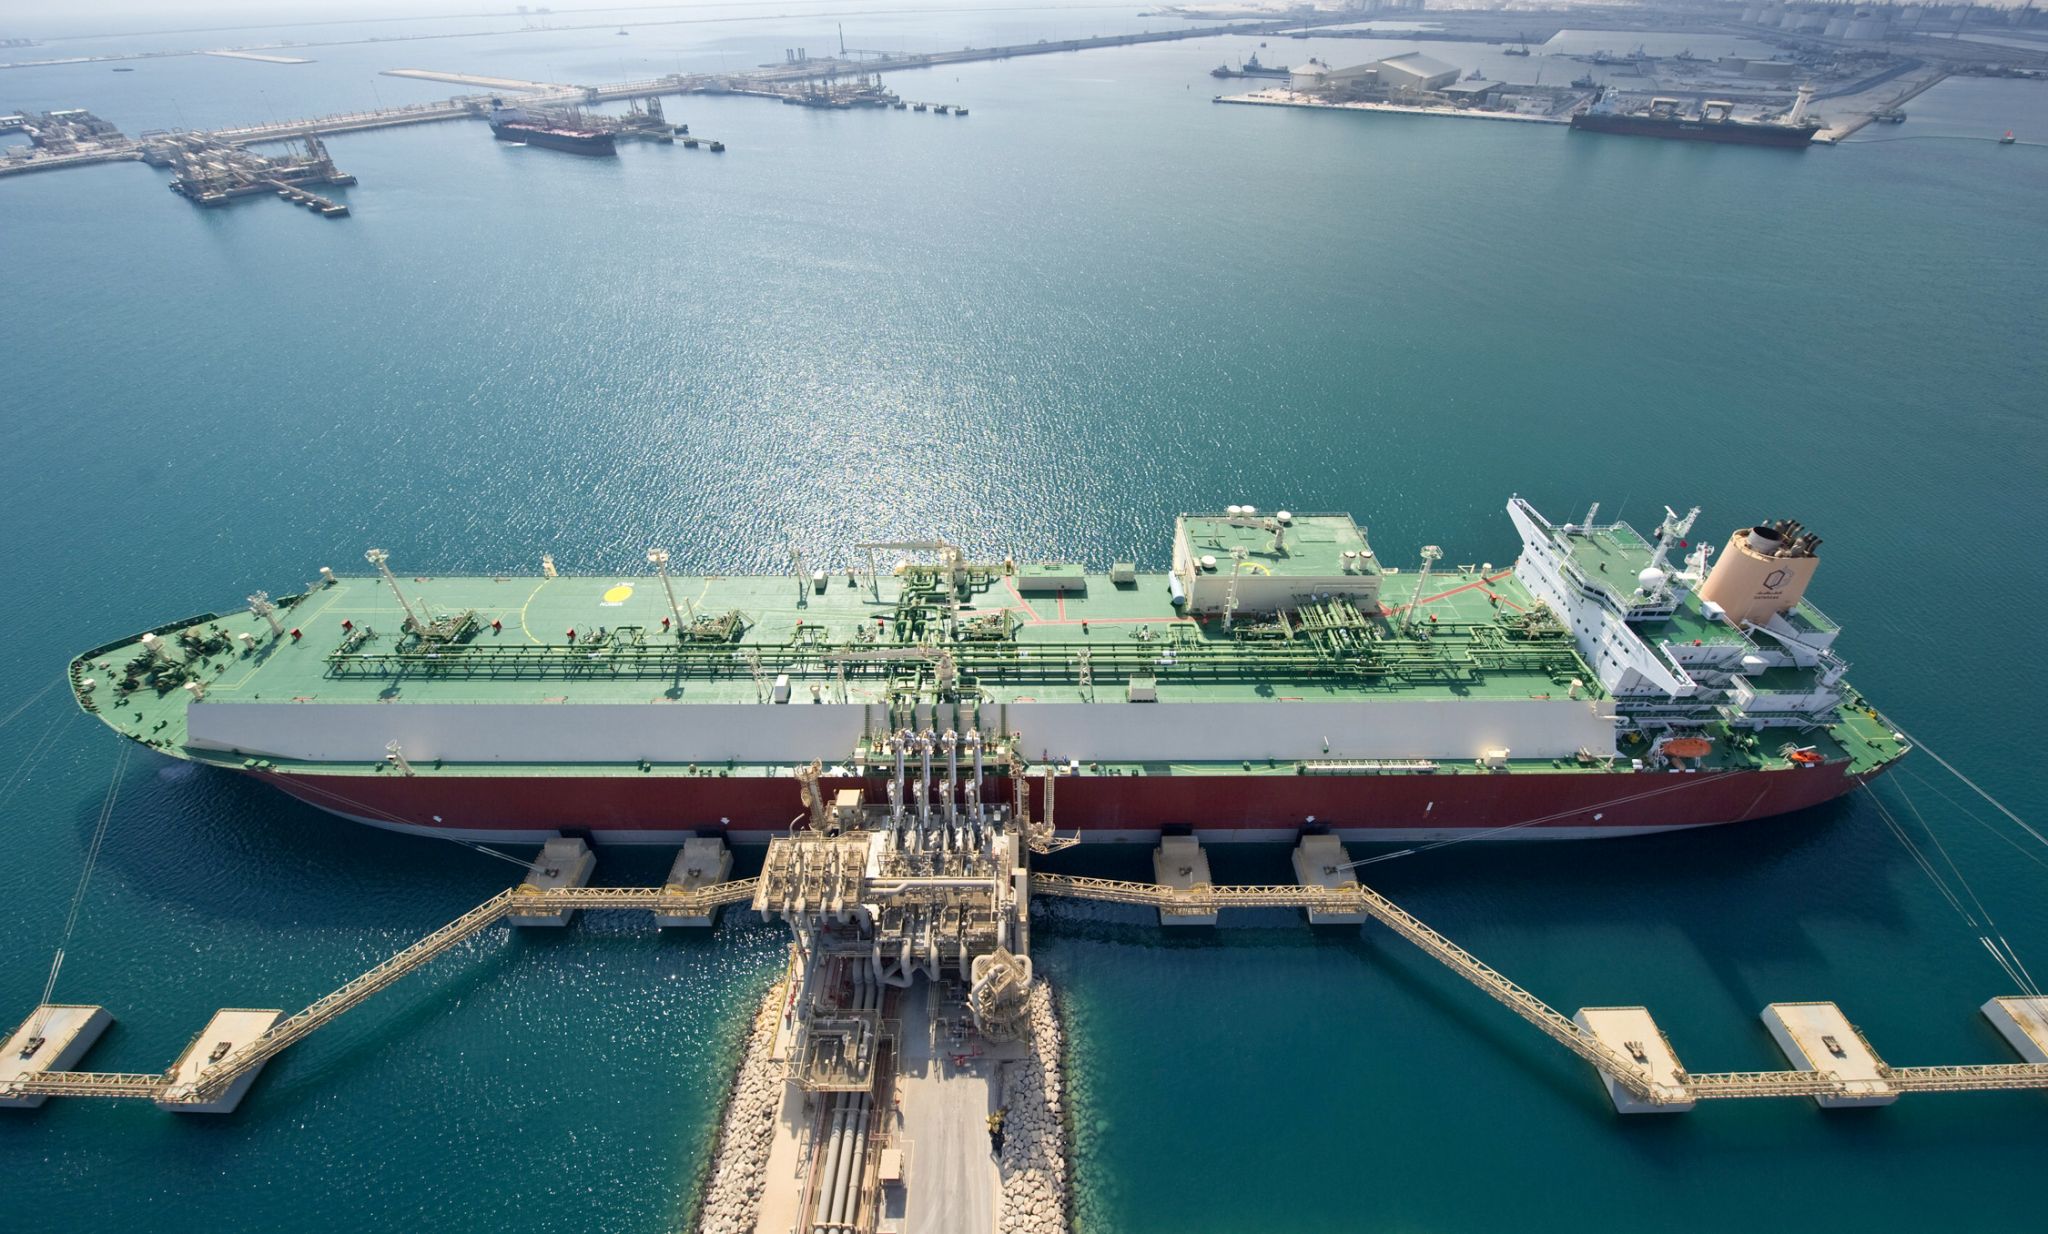 QP orders four LNG carriers at Hudong as part of giant shipbuilding program